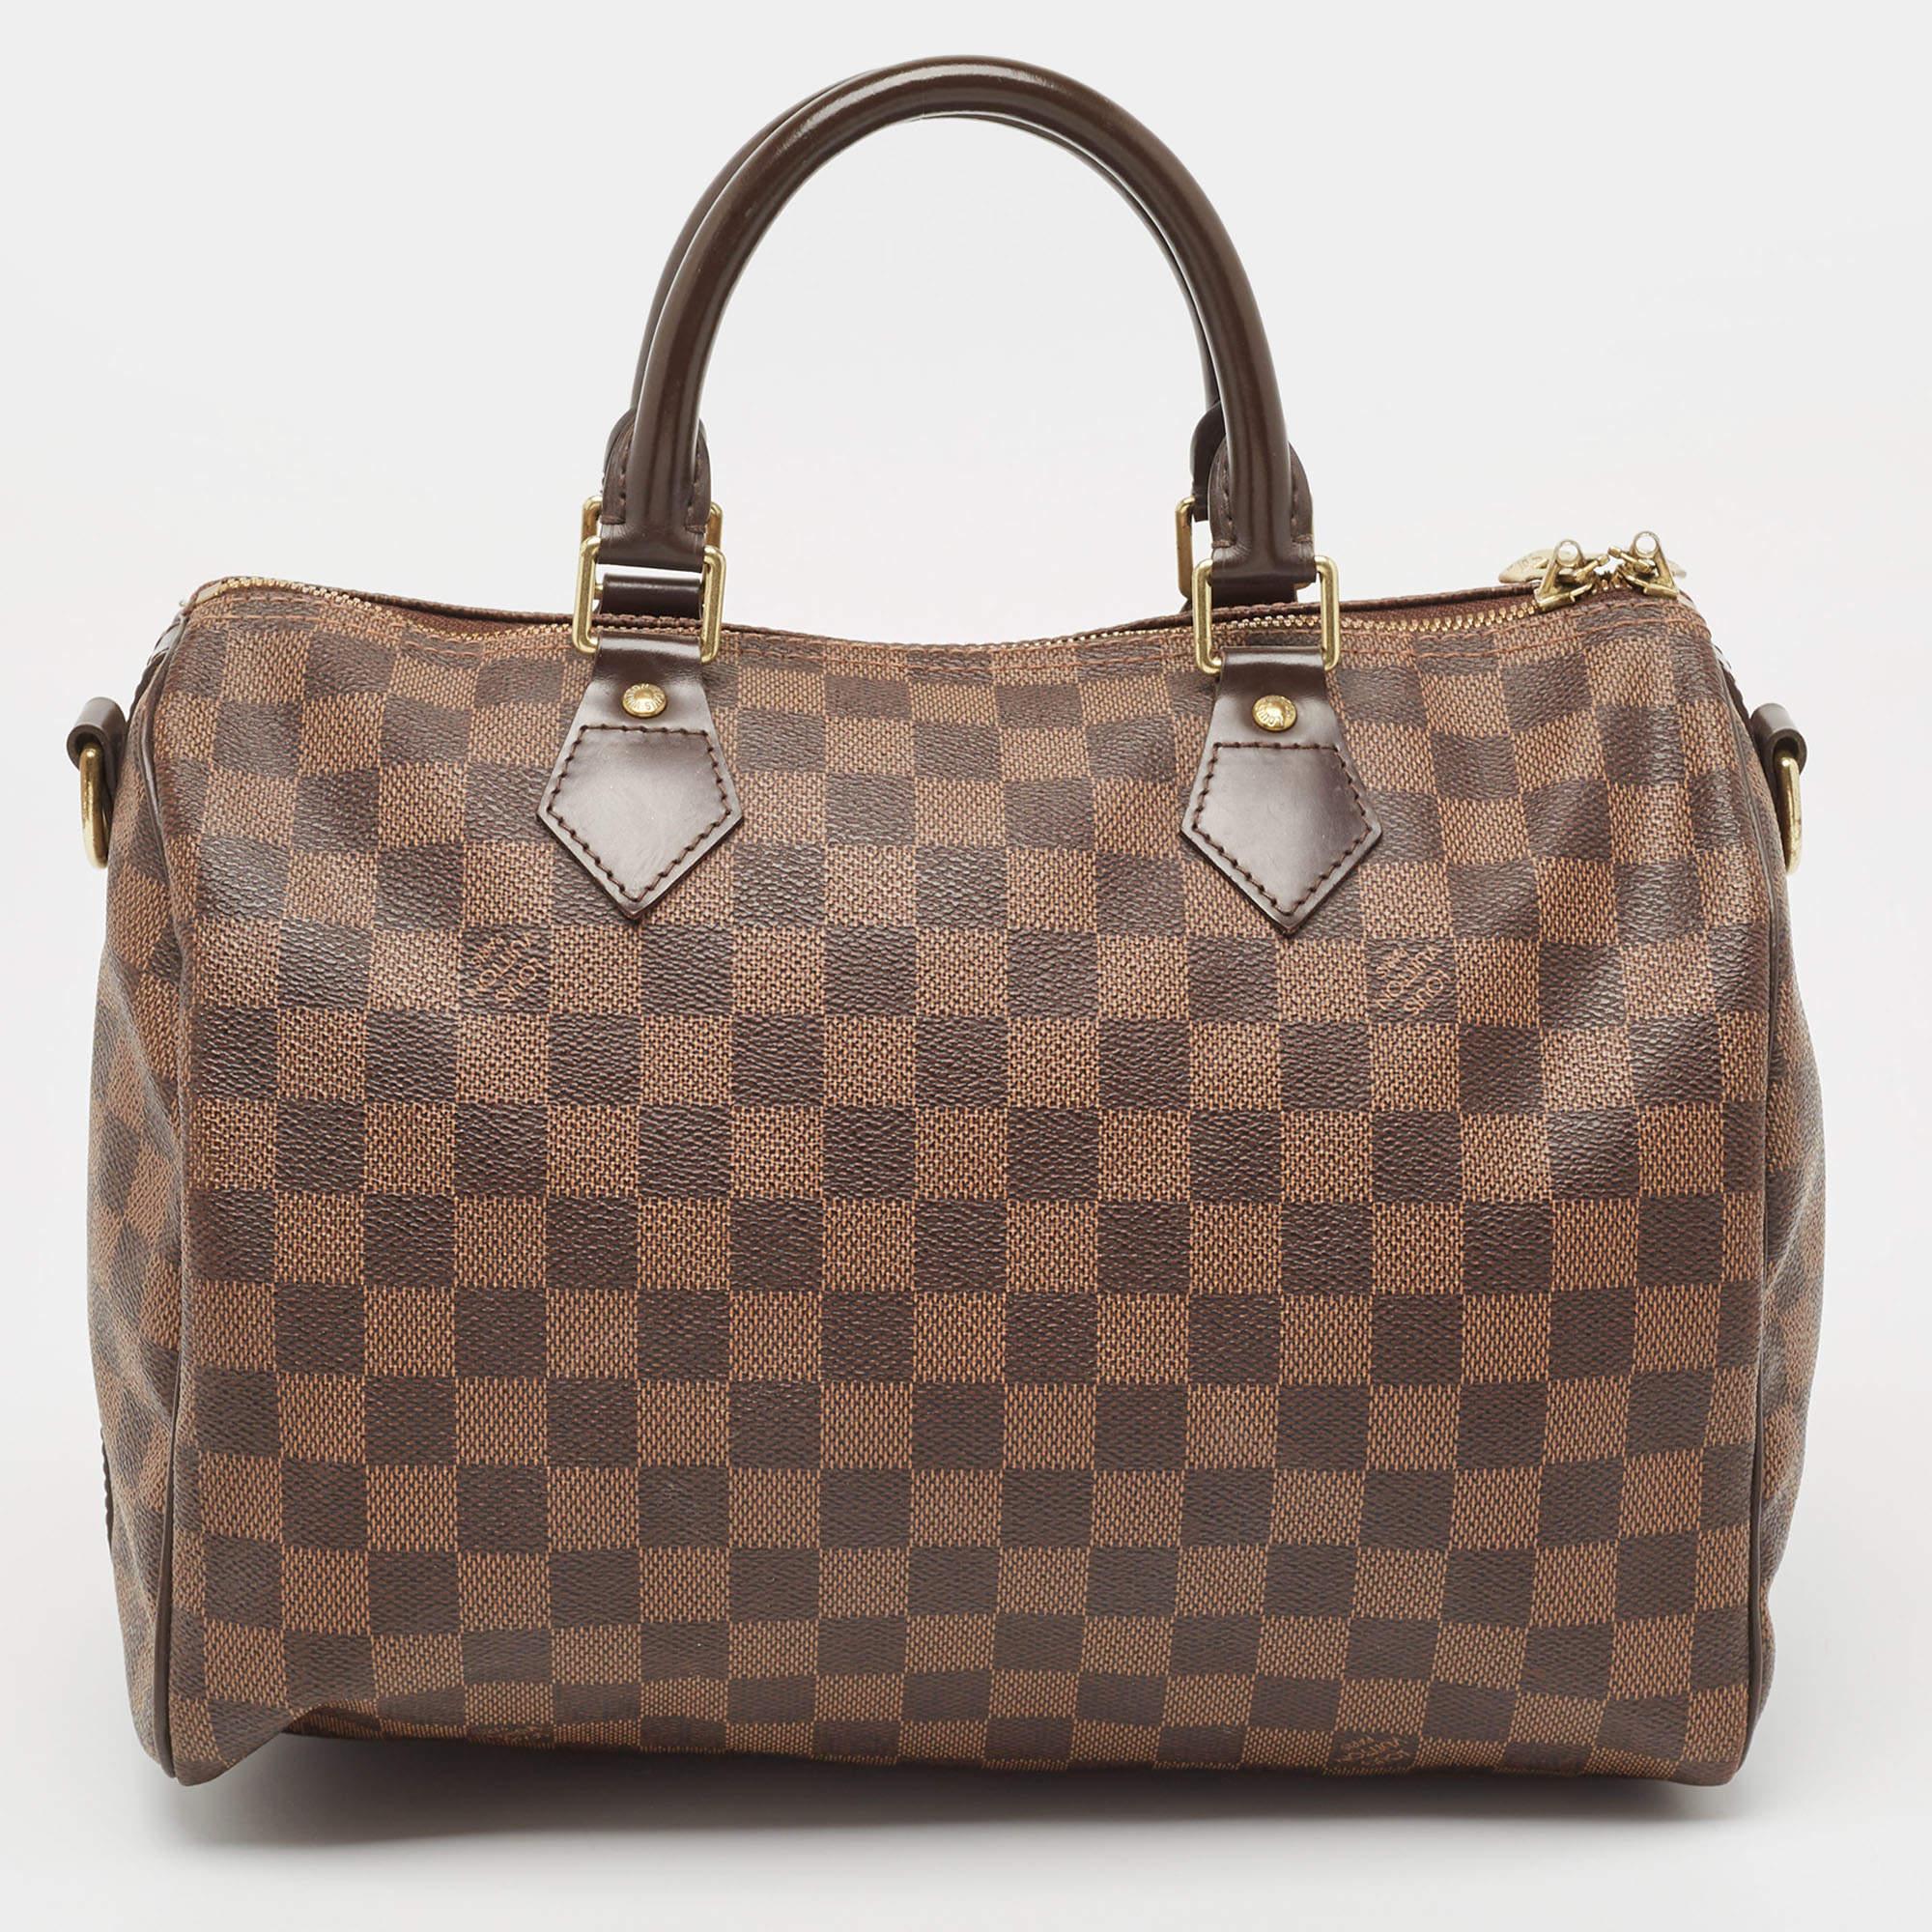 This stylish bag from Louis Vuitton has been crafted from Damier Ebene canvas. It opens to a capacious interior that can easily hold your everyday essentials. The bag is finished with gold-tone hardware and dual handles.

Includes: Original Dustbag,